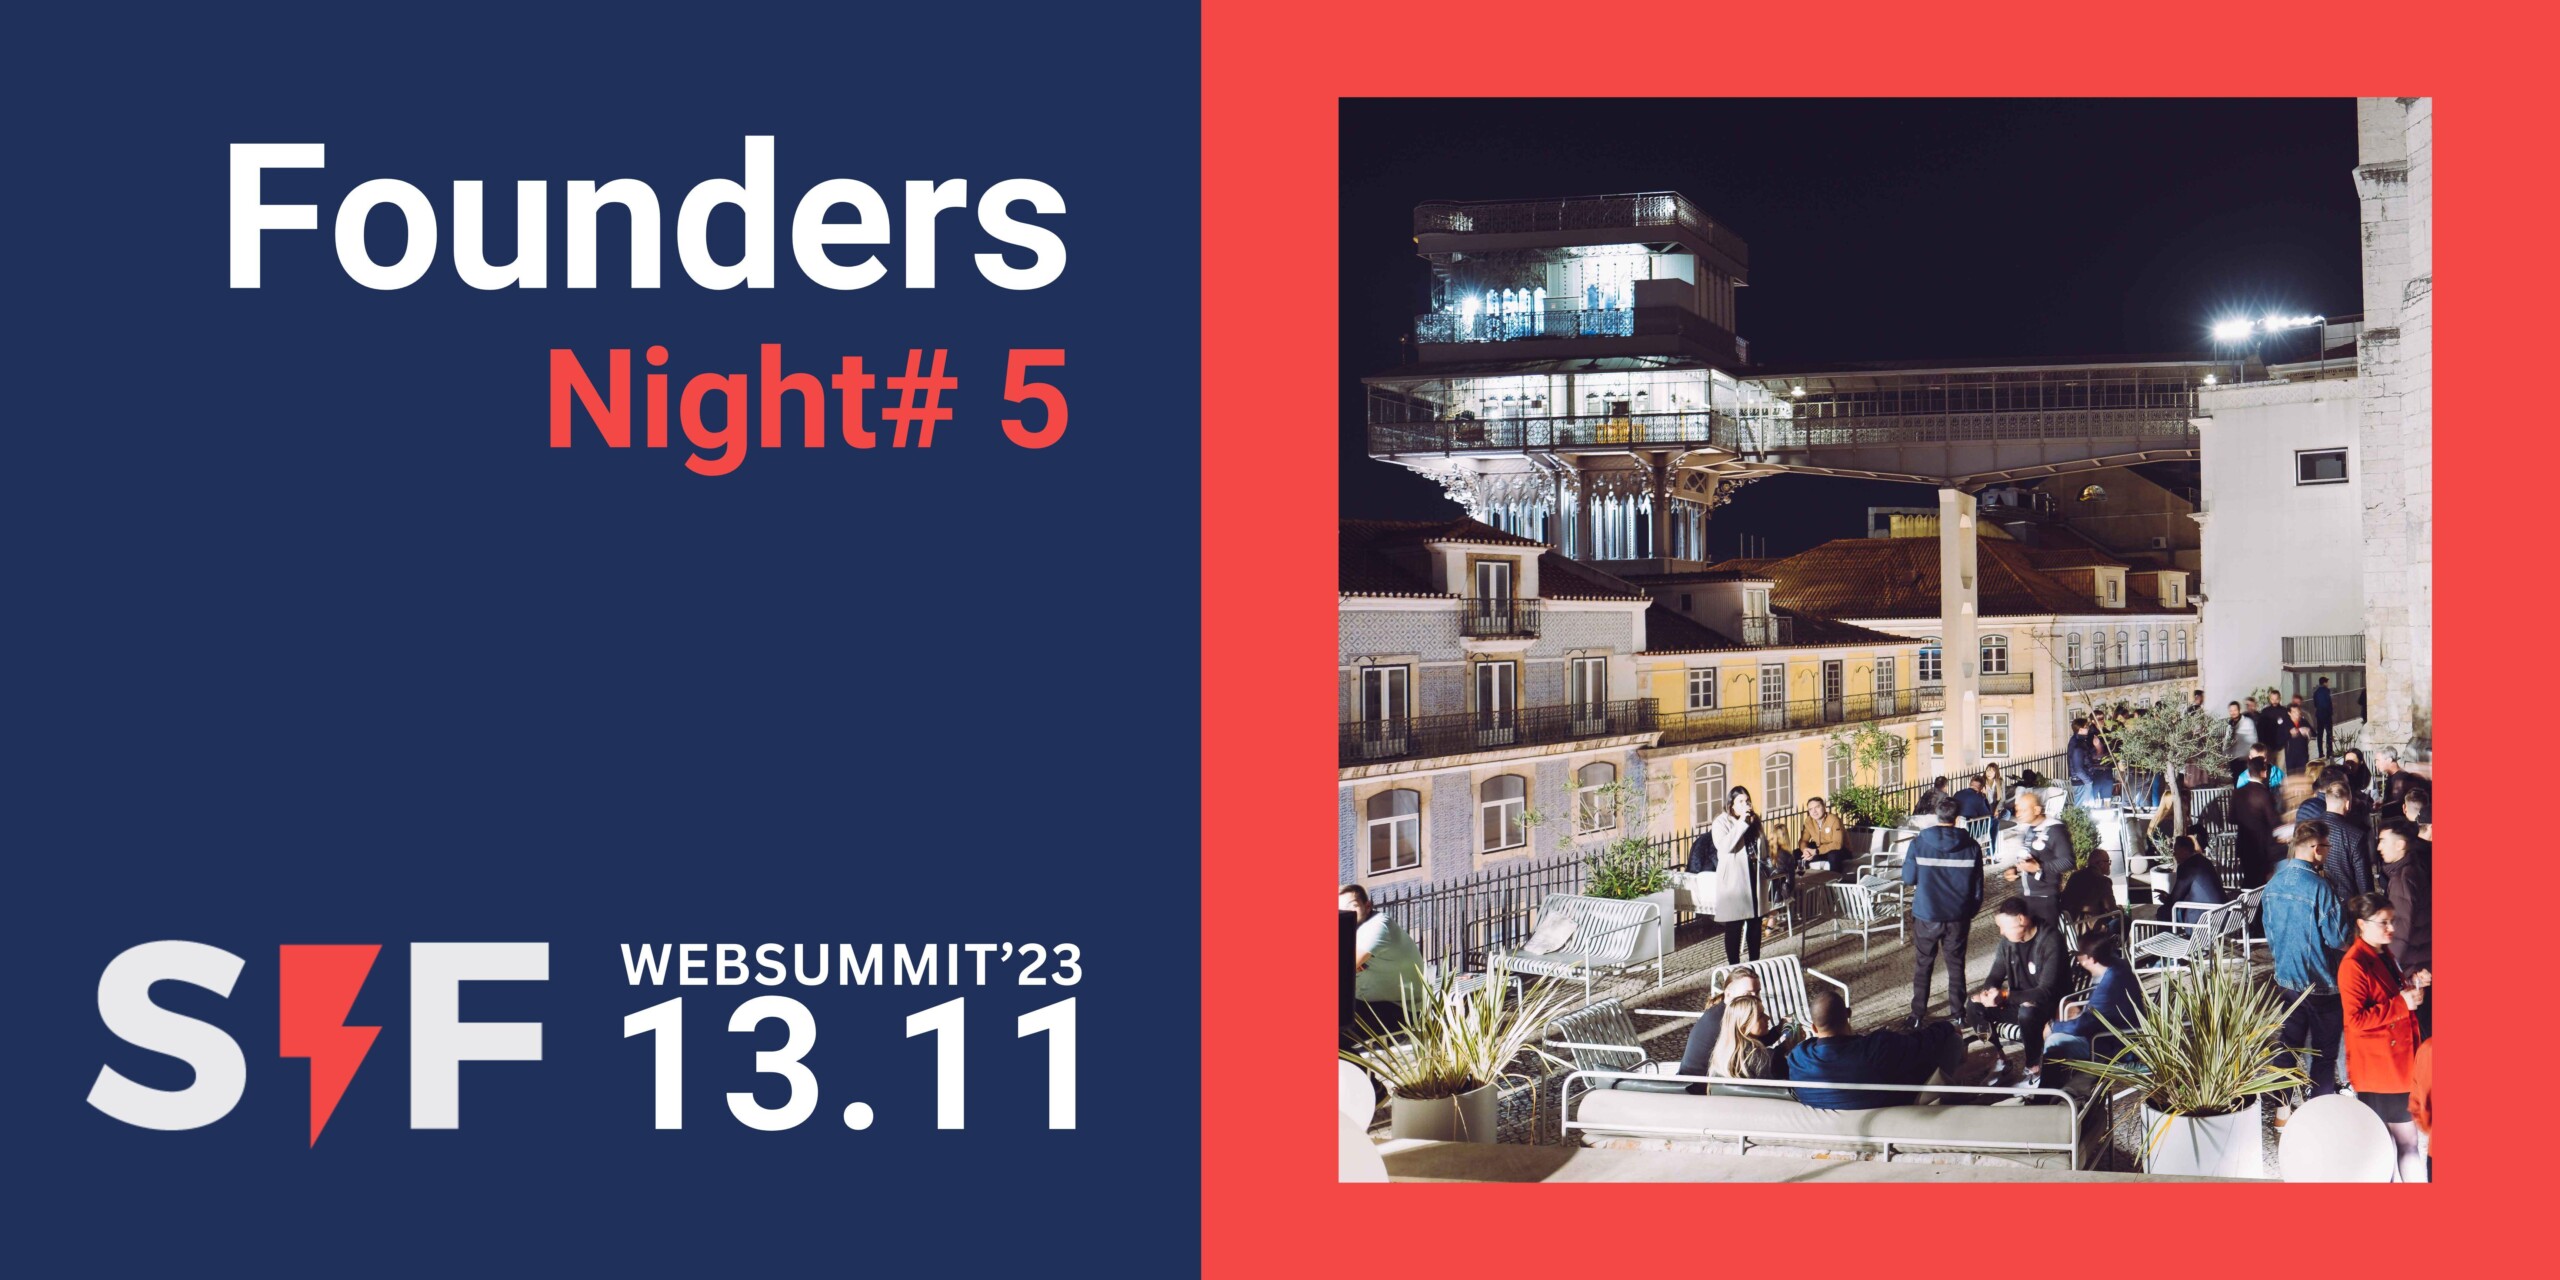 FOUNDERS NIGHT #5 | best networking event at WebSummit’23